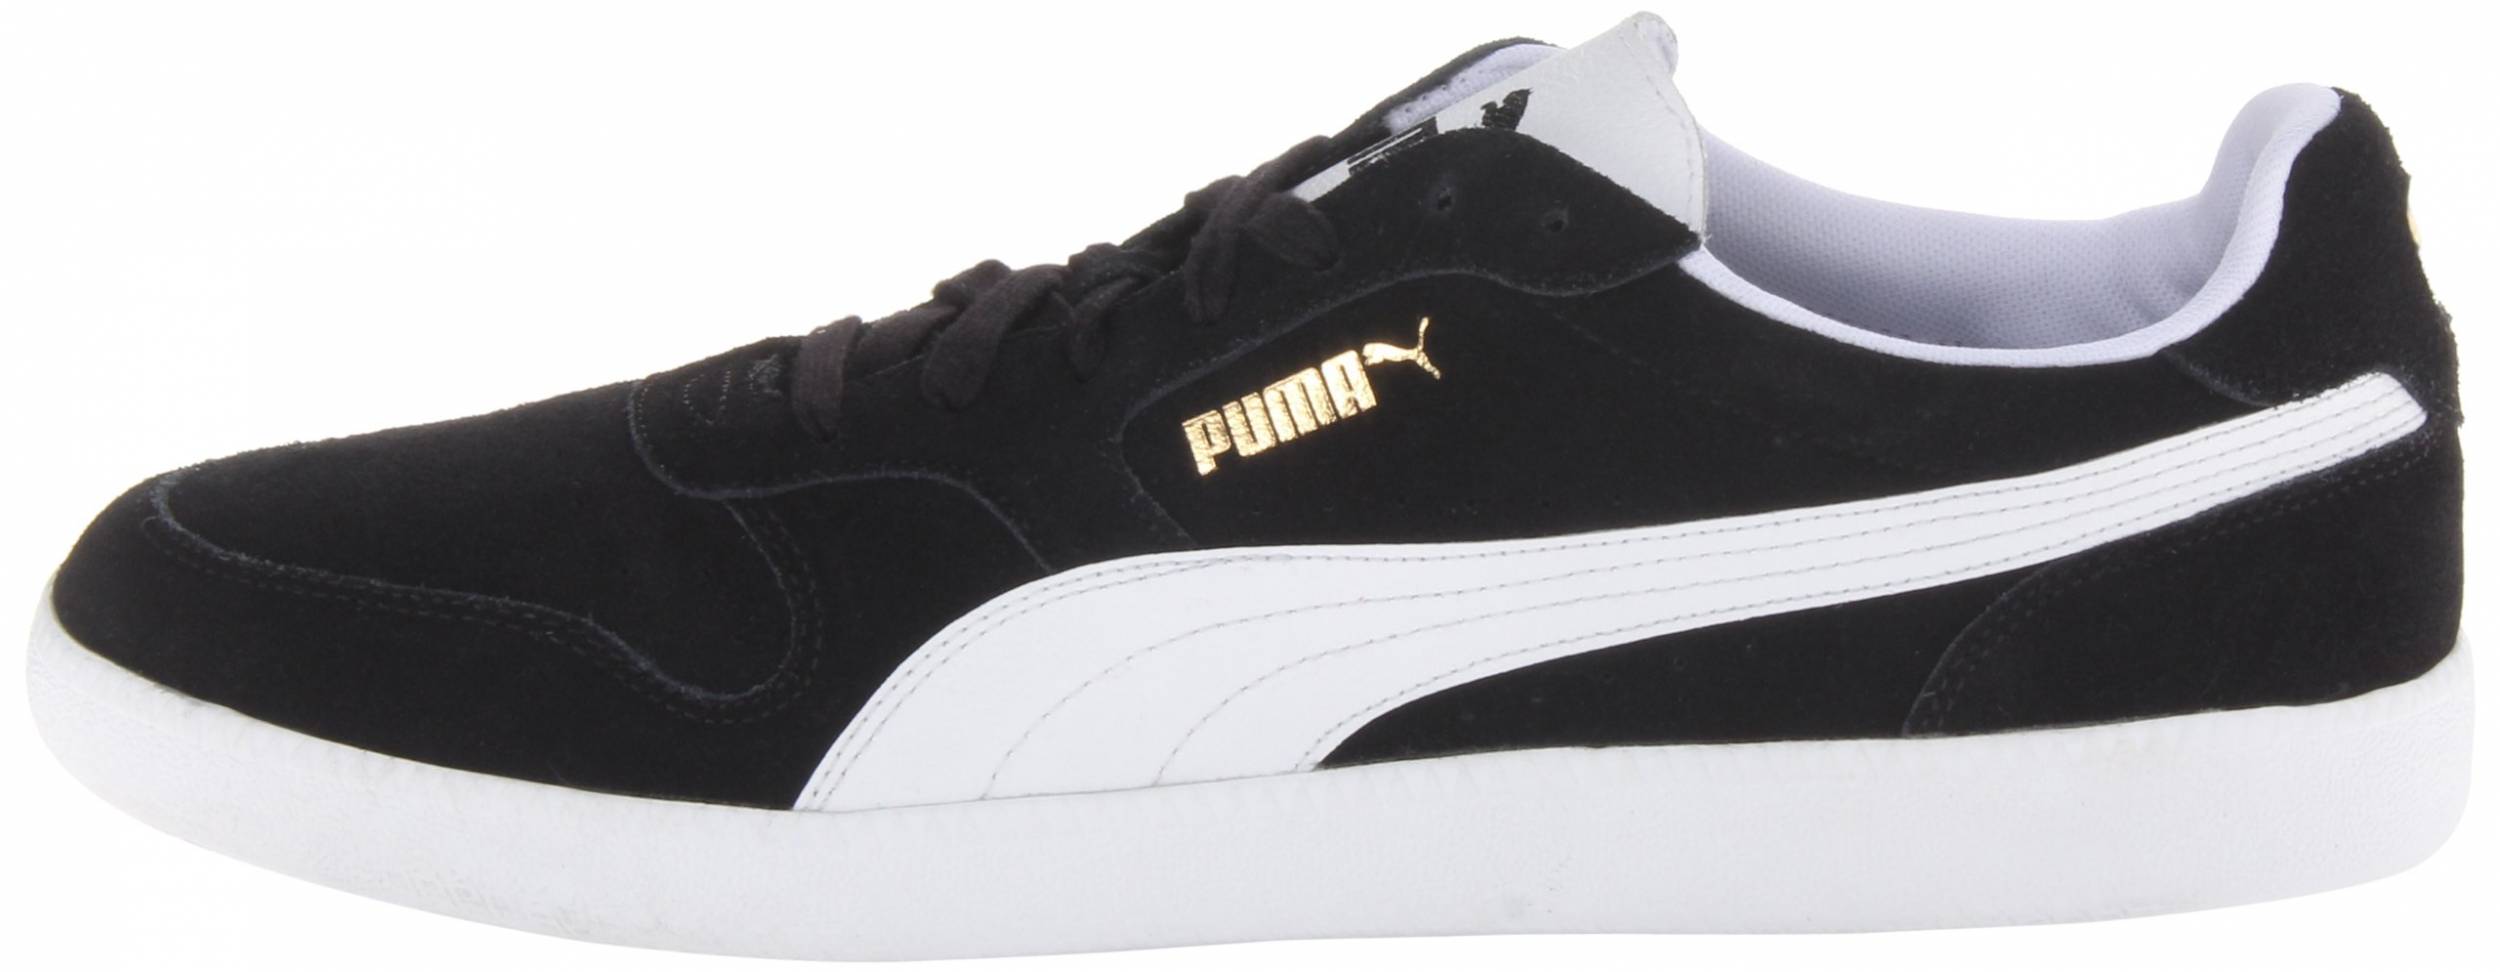 $70 + Review of Puma Icra Trainer 